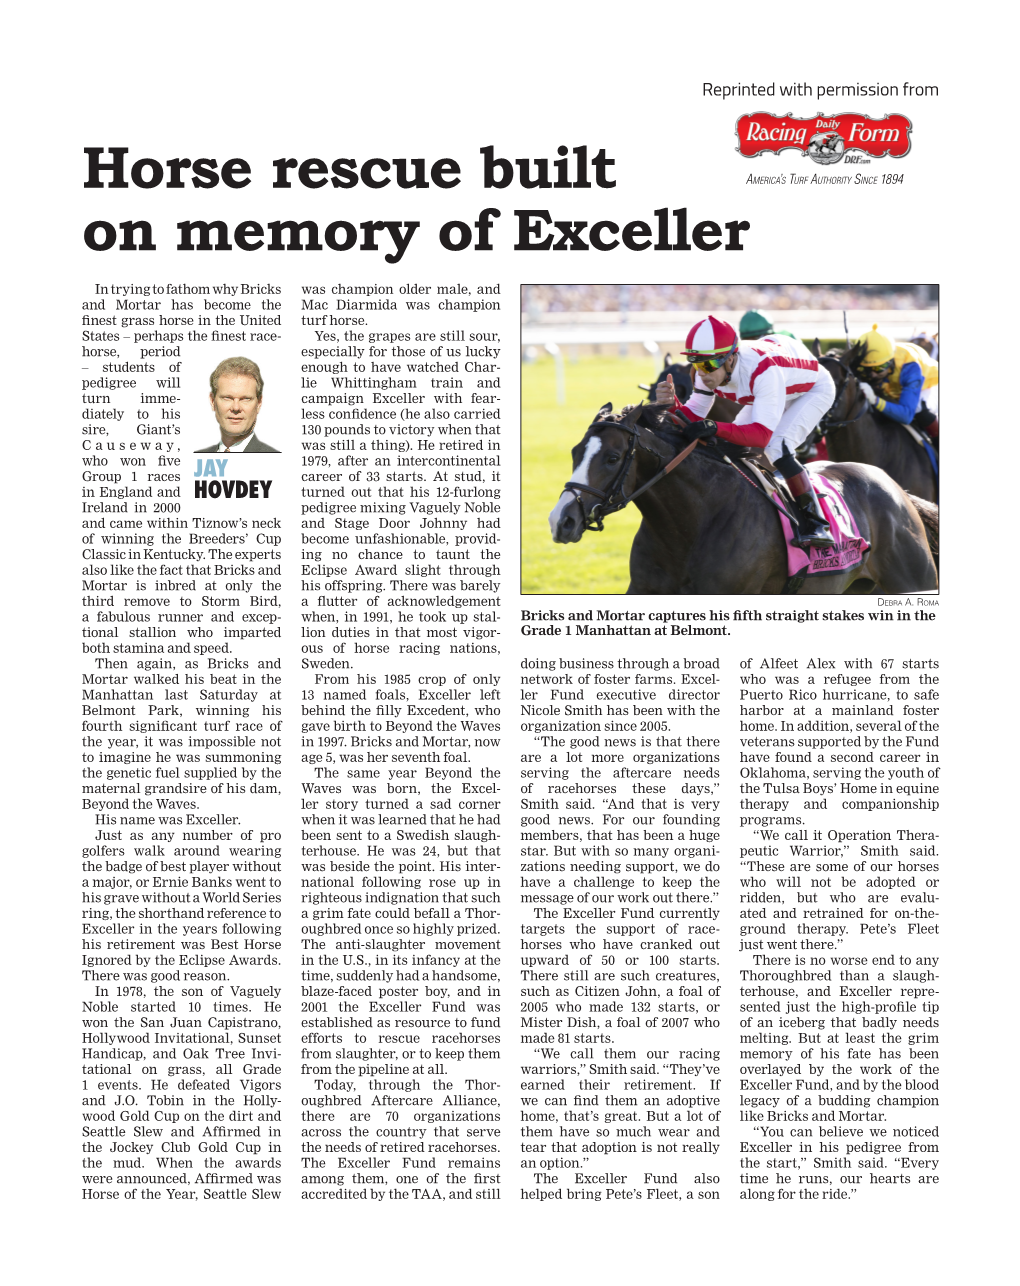 Horse Rescue Built on Memory of Exceller